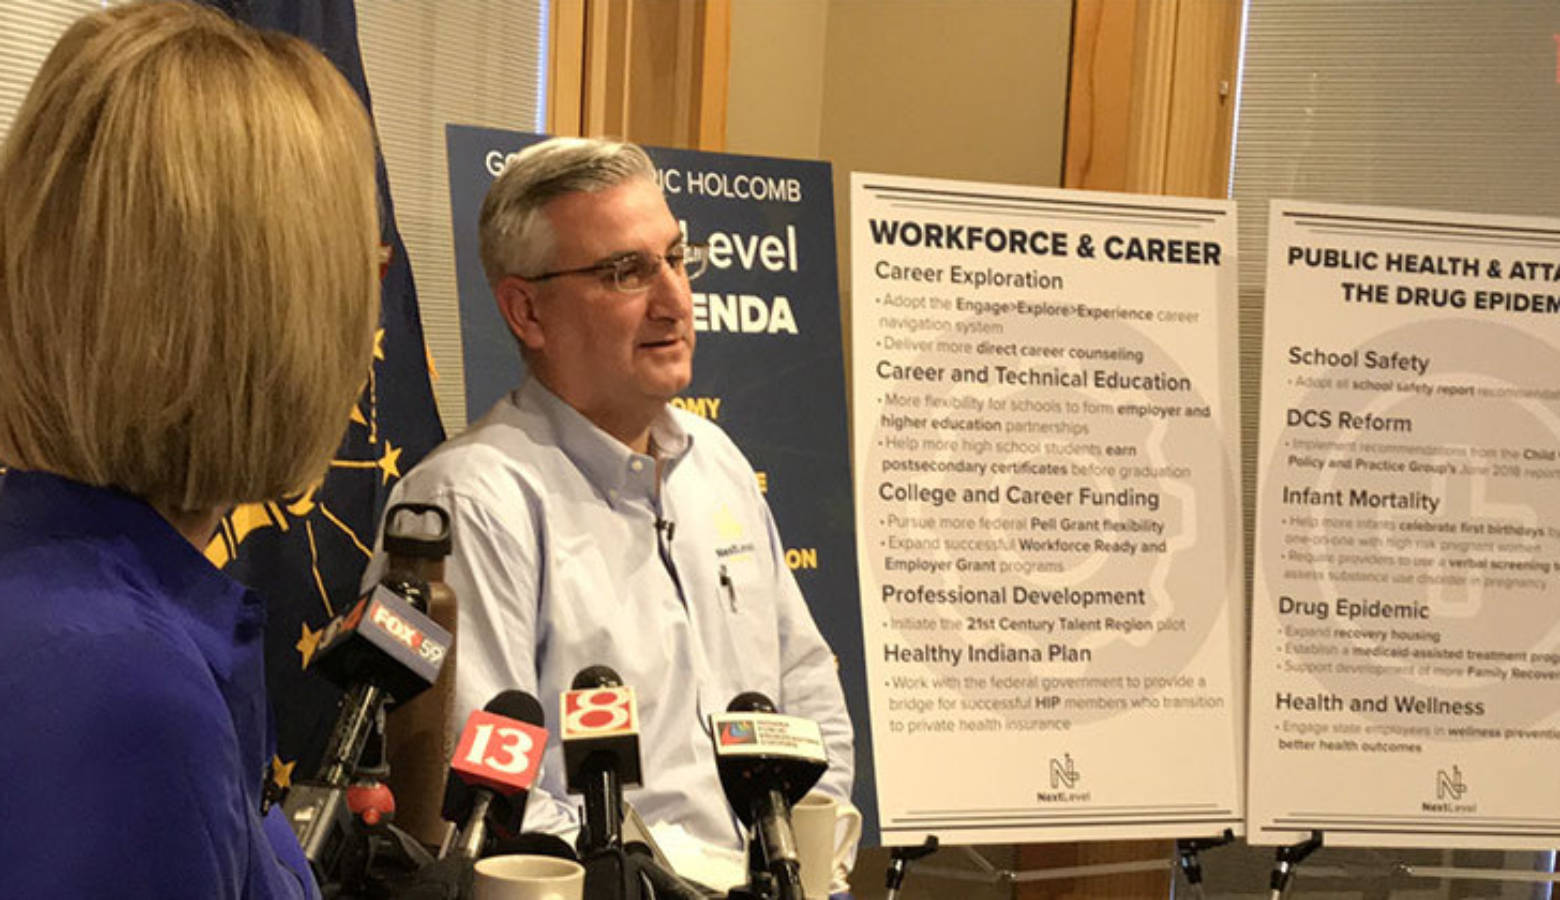 While unveiling his 2019 legislative agenda last week, Gov. Eric Holcomb said the teacher pay increase may need to wait until 2021. On Wednesday, he said he's calling for an increase in K-12 funding that could be used by school districts to increase teacher pay in the short term.